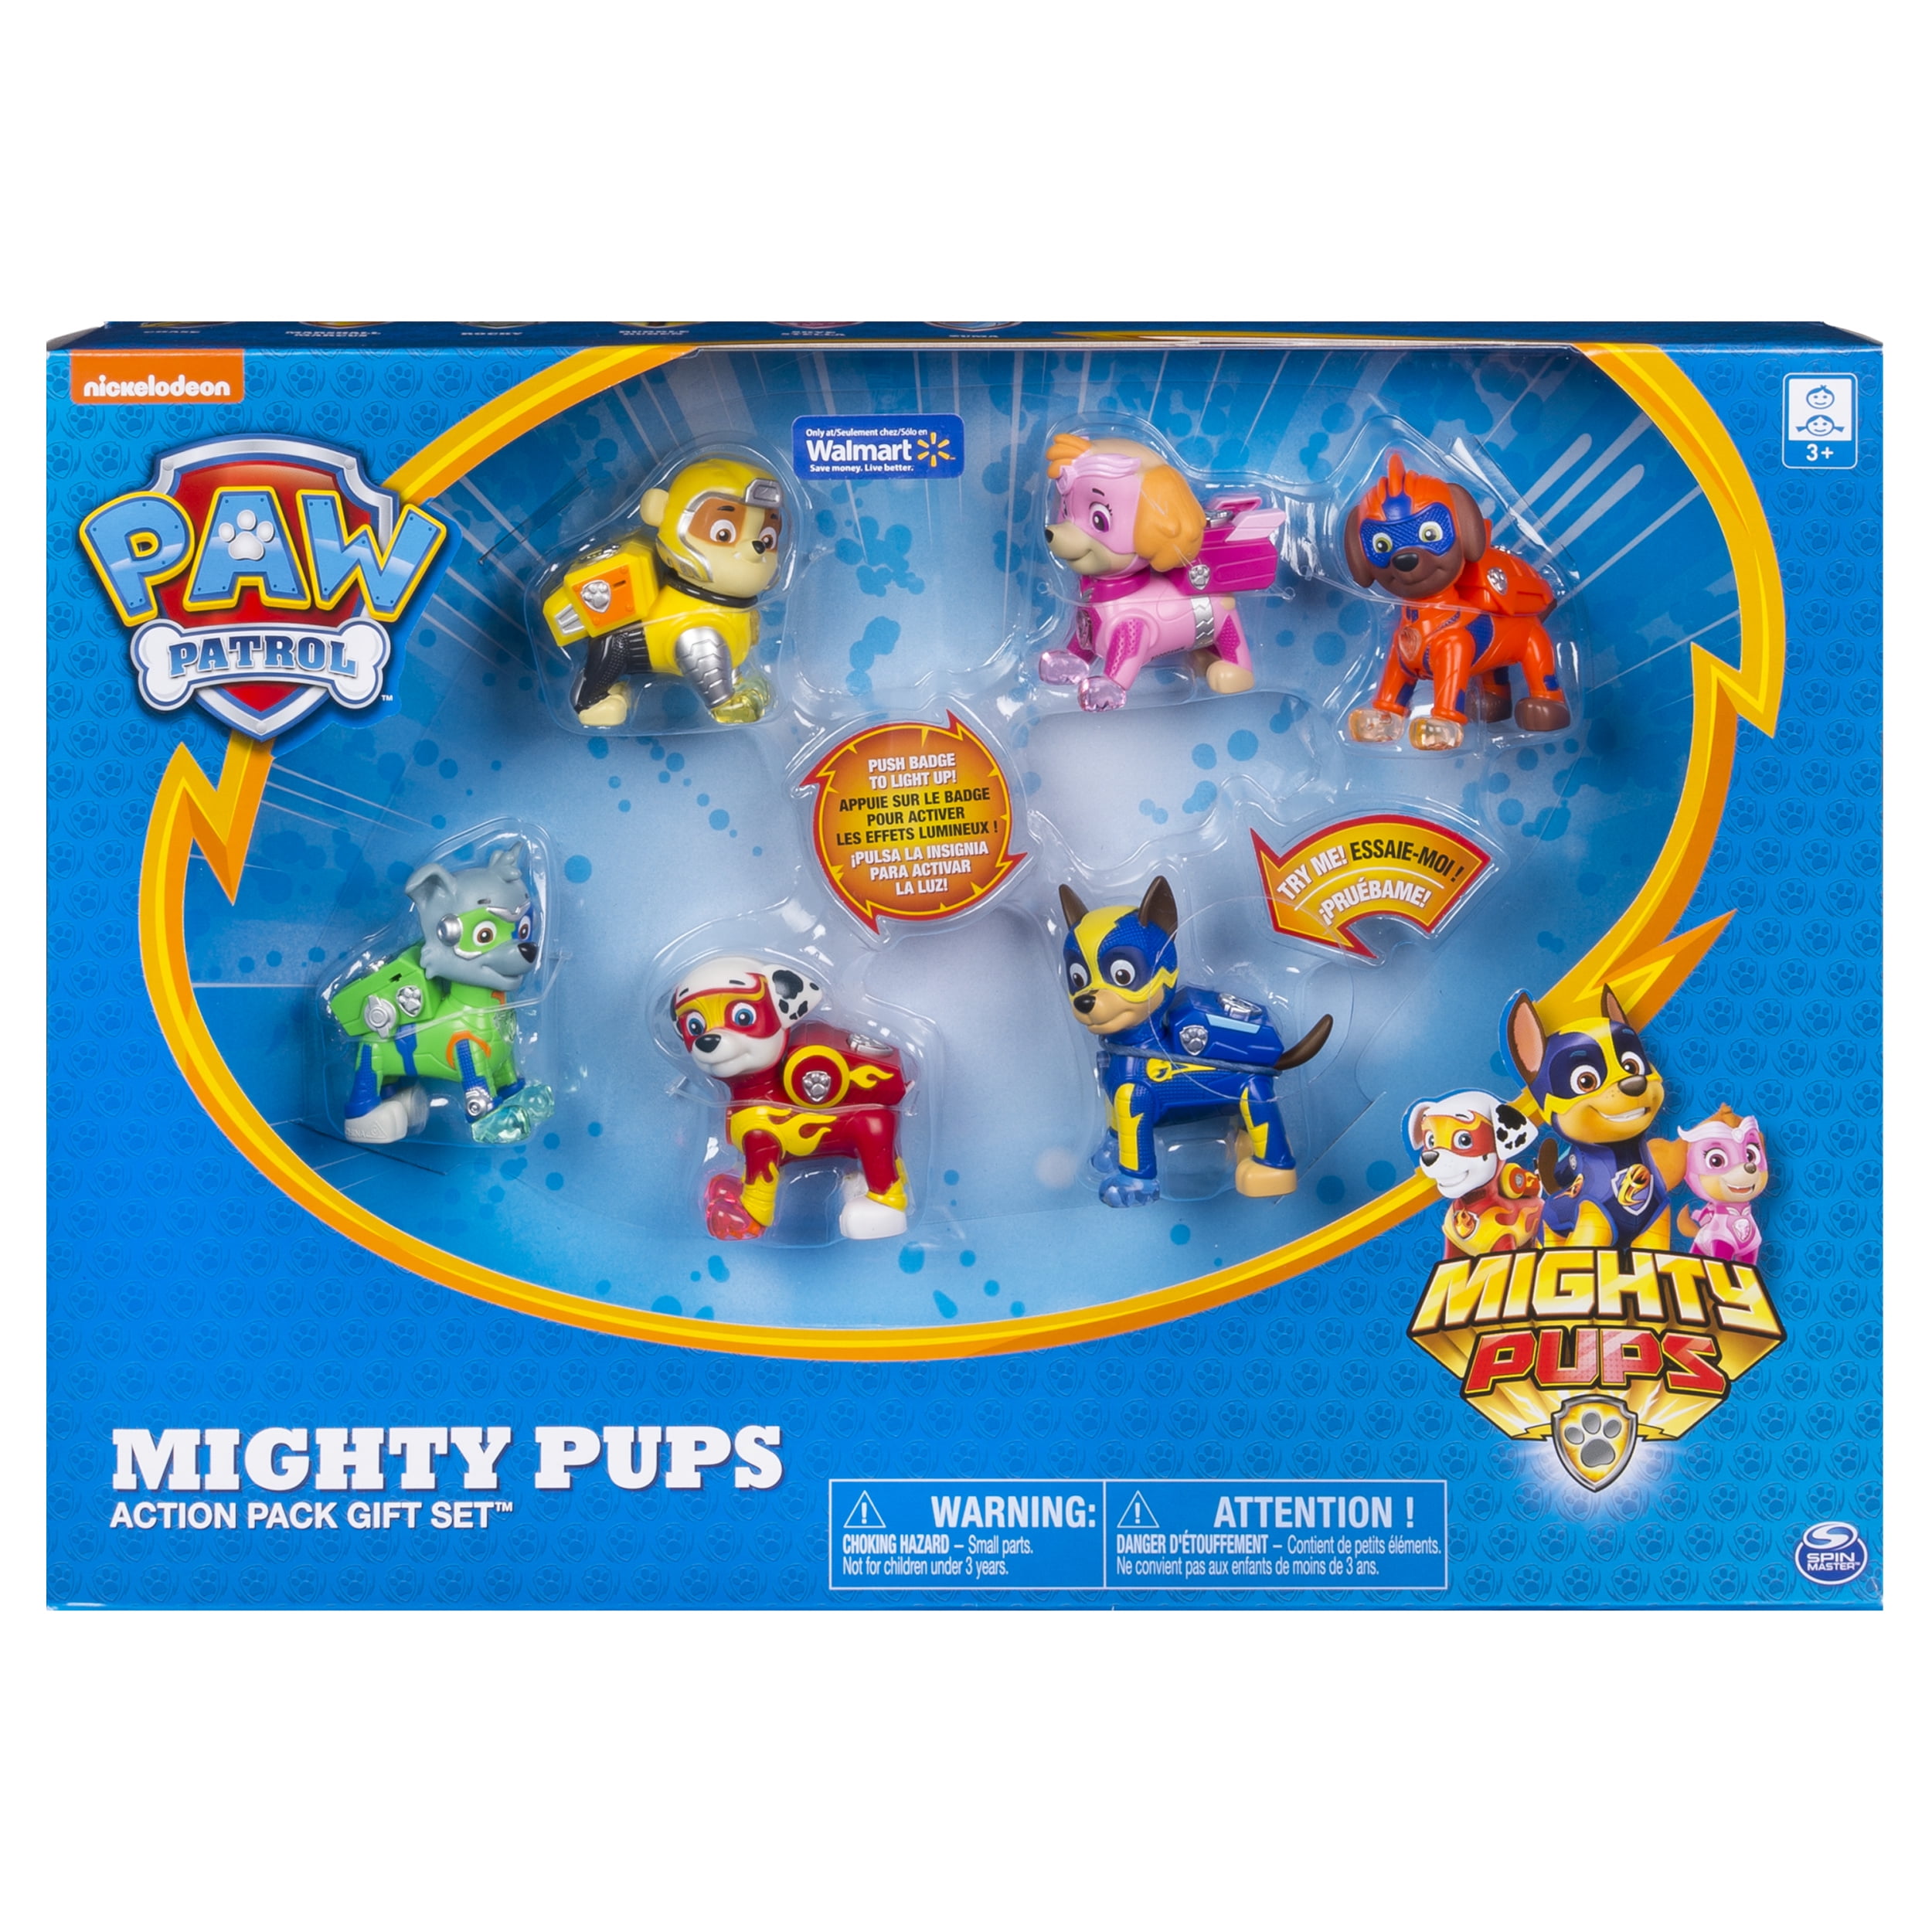 Paw Patrol Mighty Pups Action Pack Gift Set w 6 Pup Figures Badges & Feet Light 